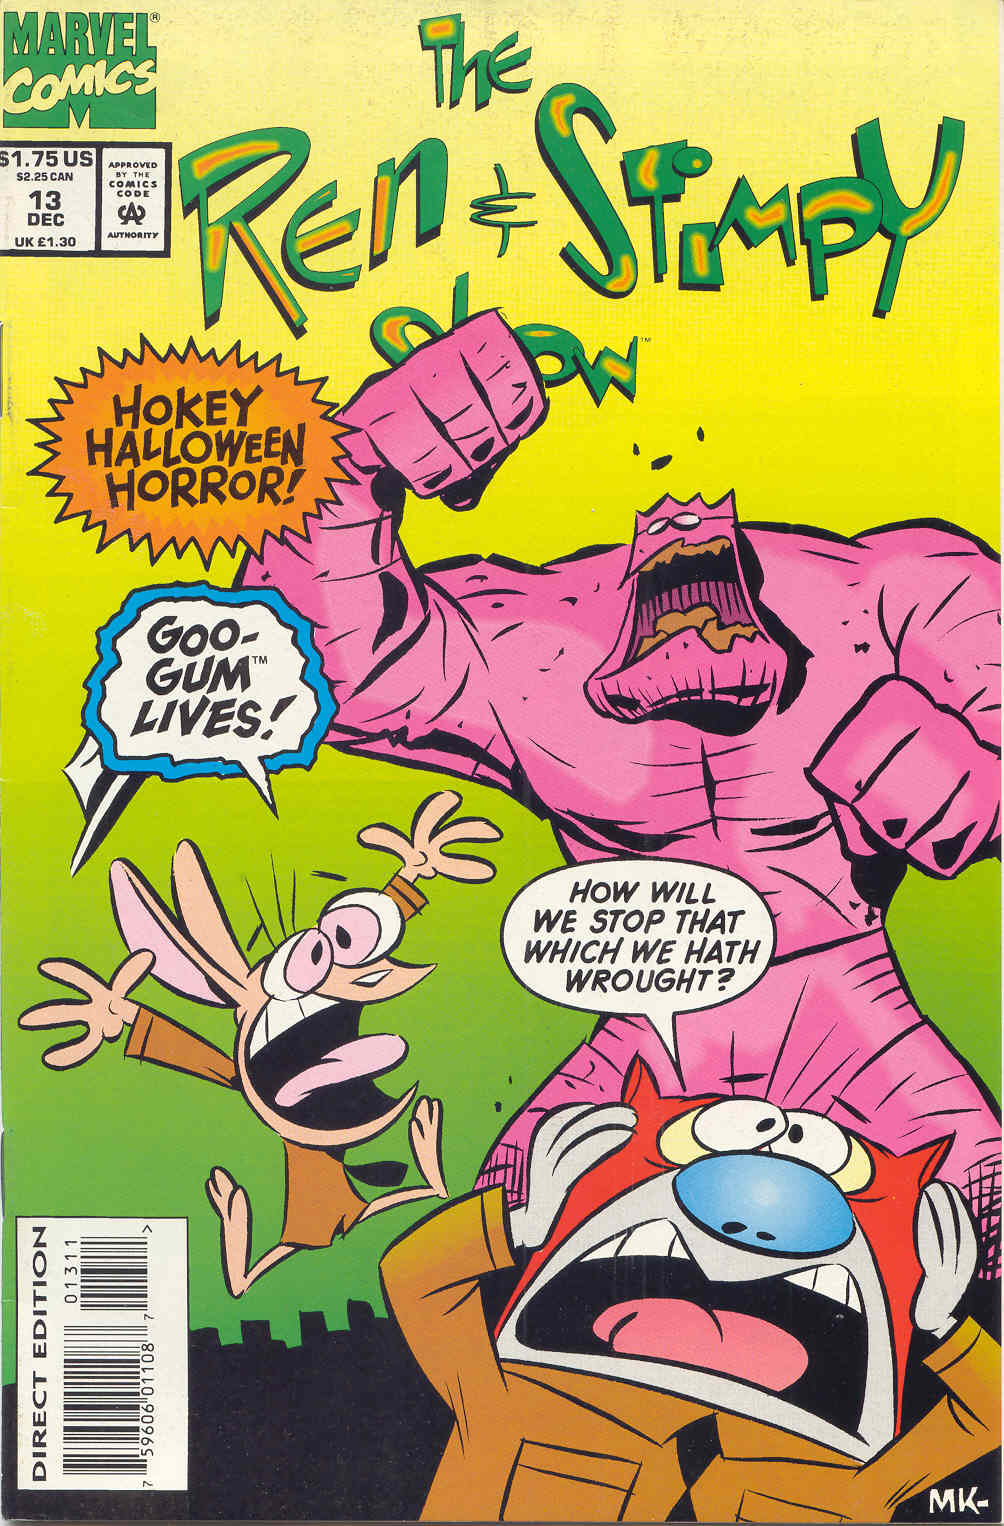 Issue 13 cover